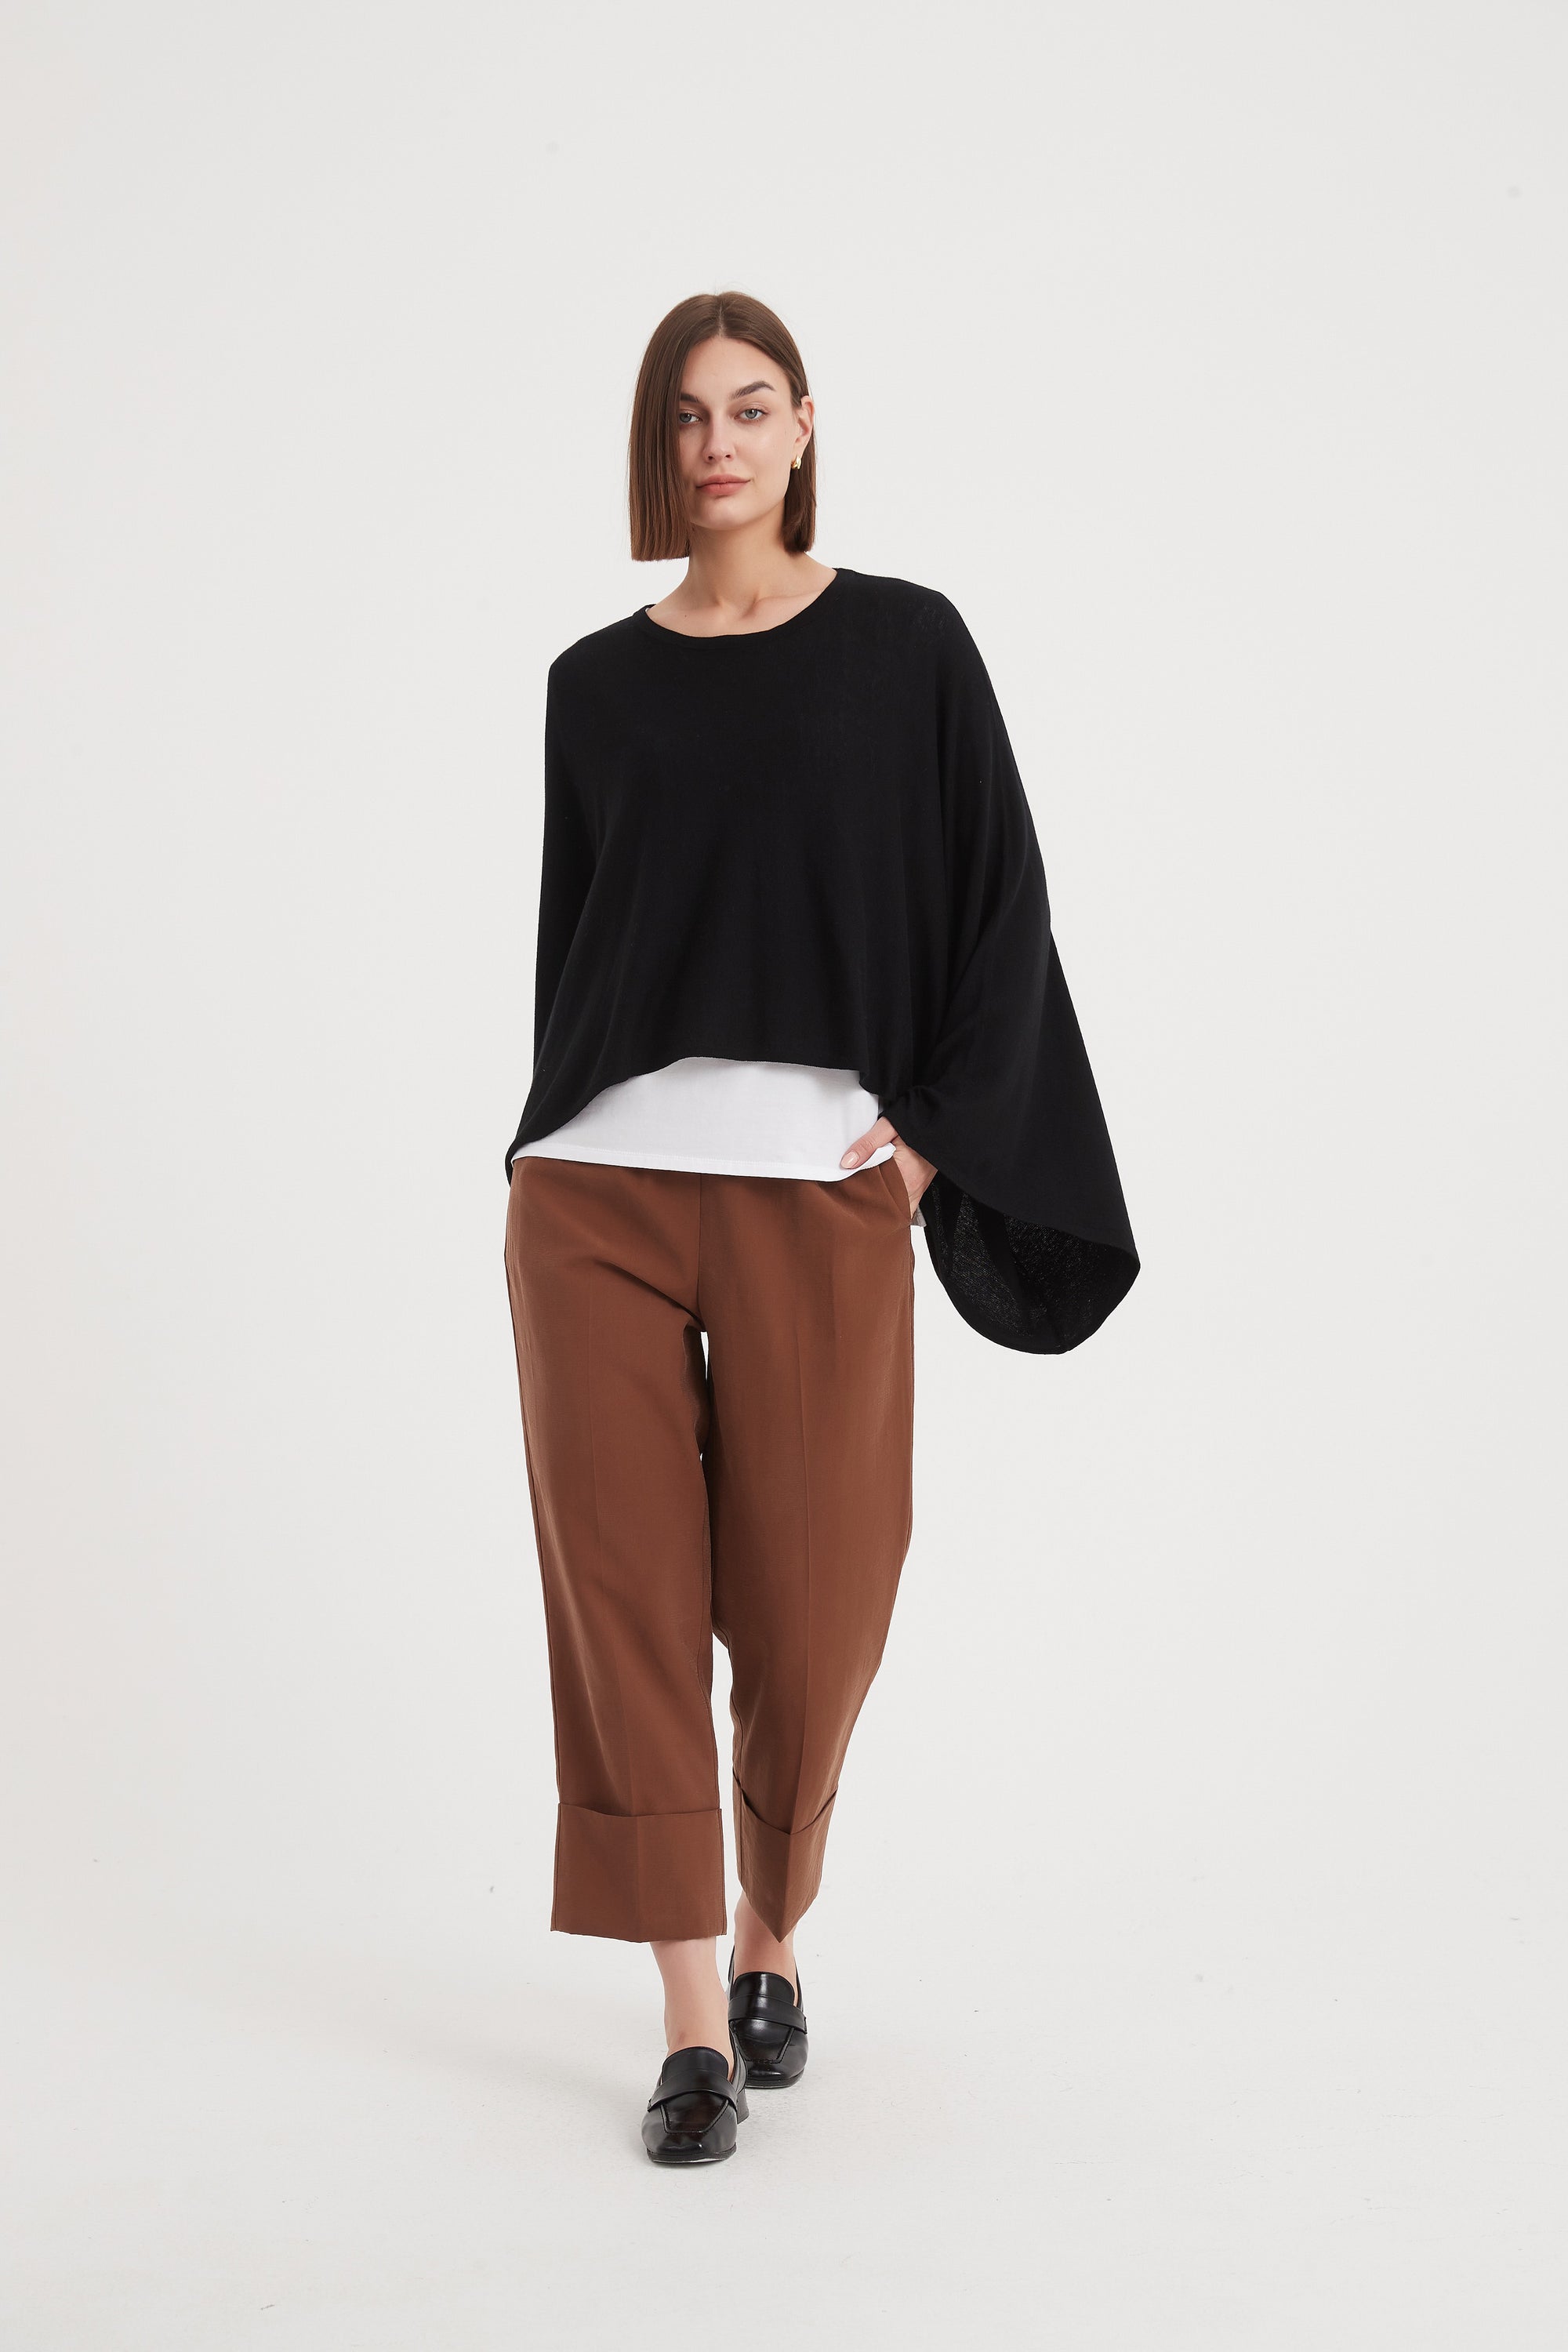 OVERSIZED KNIT LAYER TOP